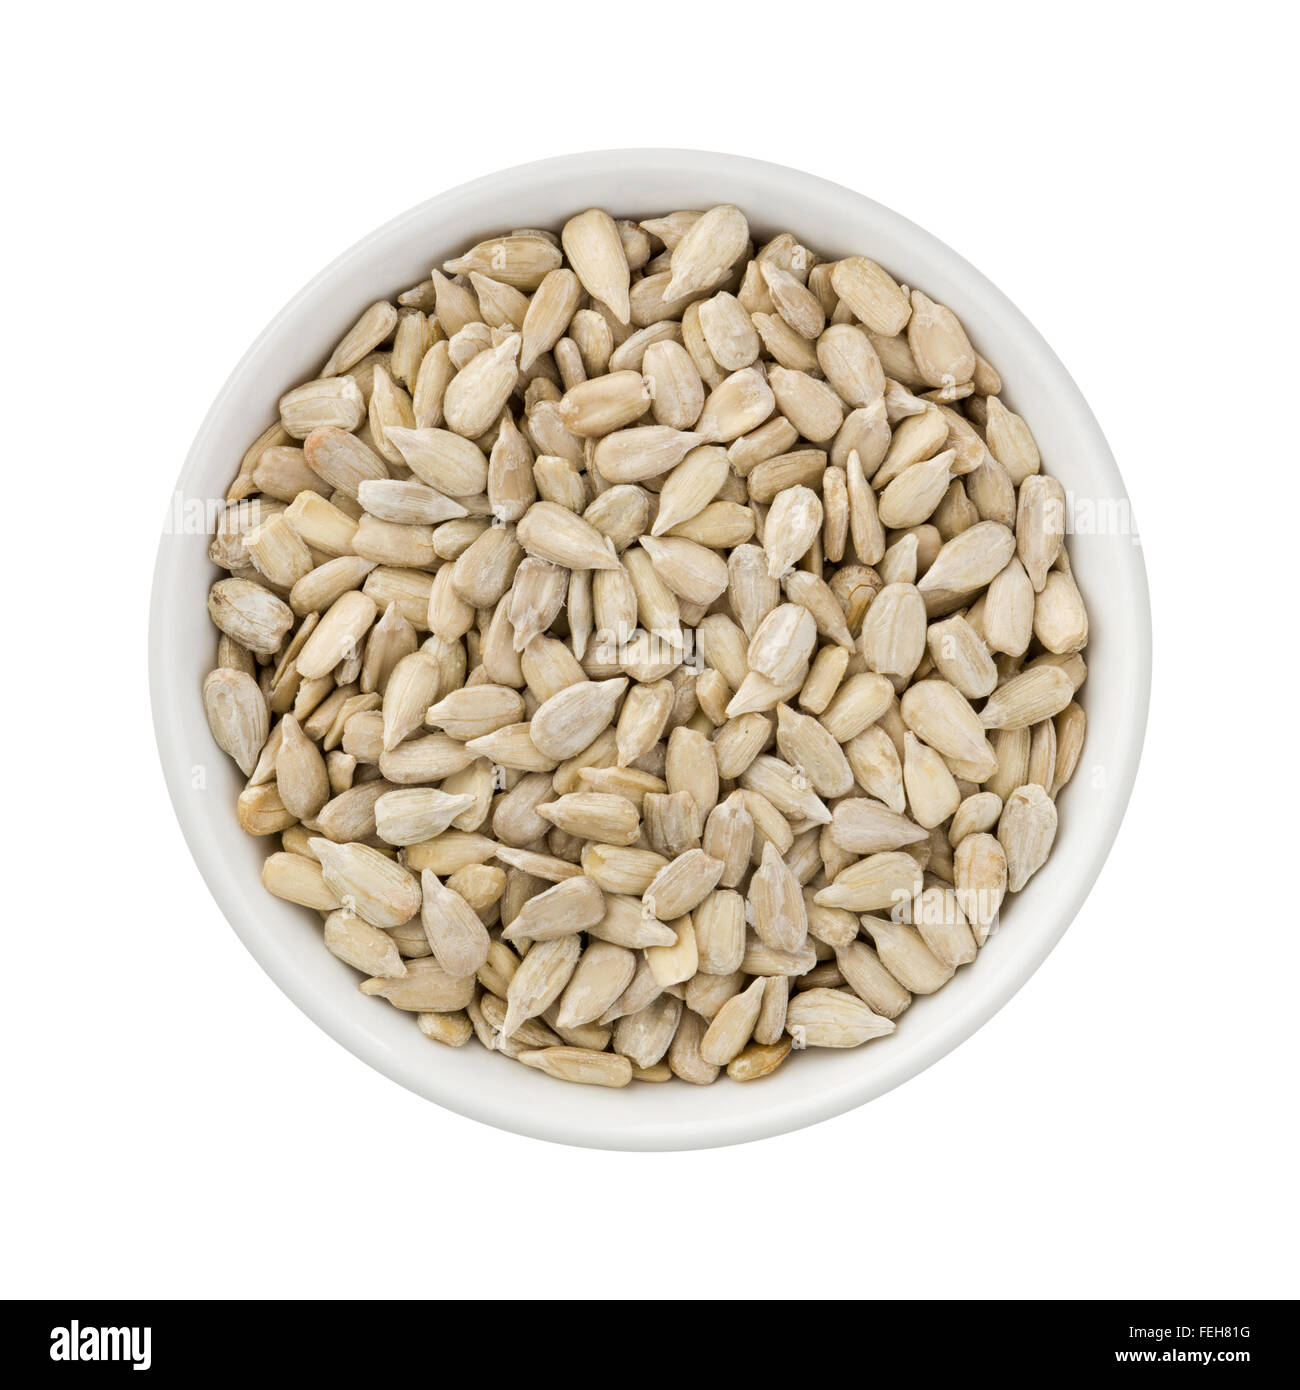 Sunflower Seeds in a Ceramic Bowl. The image is a cut out, isolated on a white background. Stock Photo